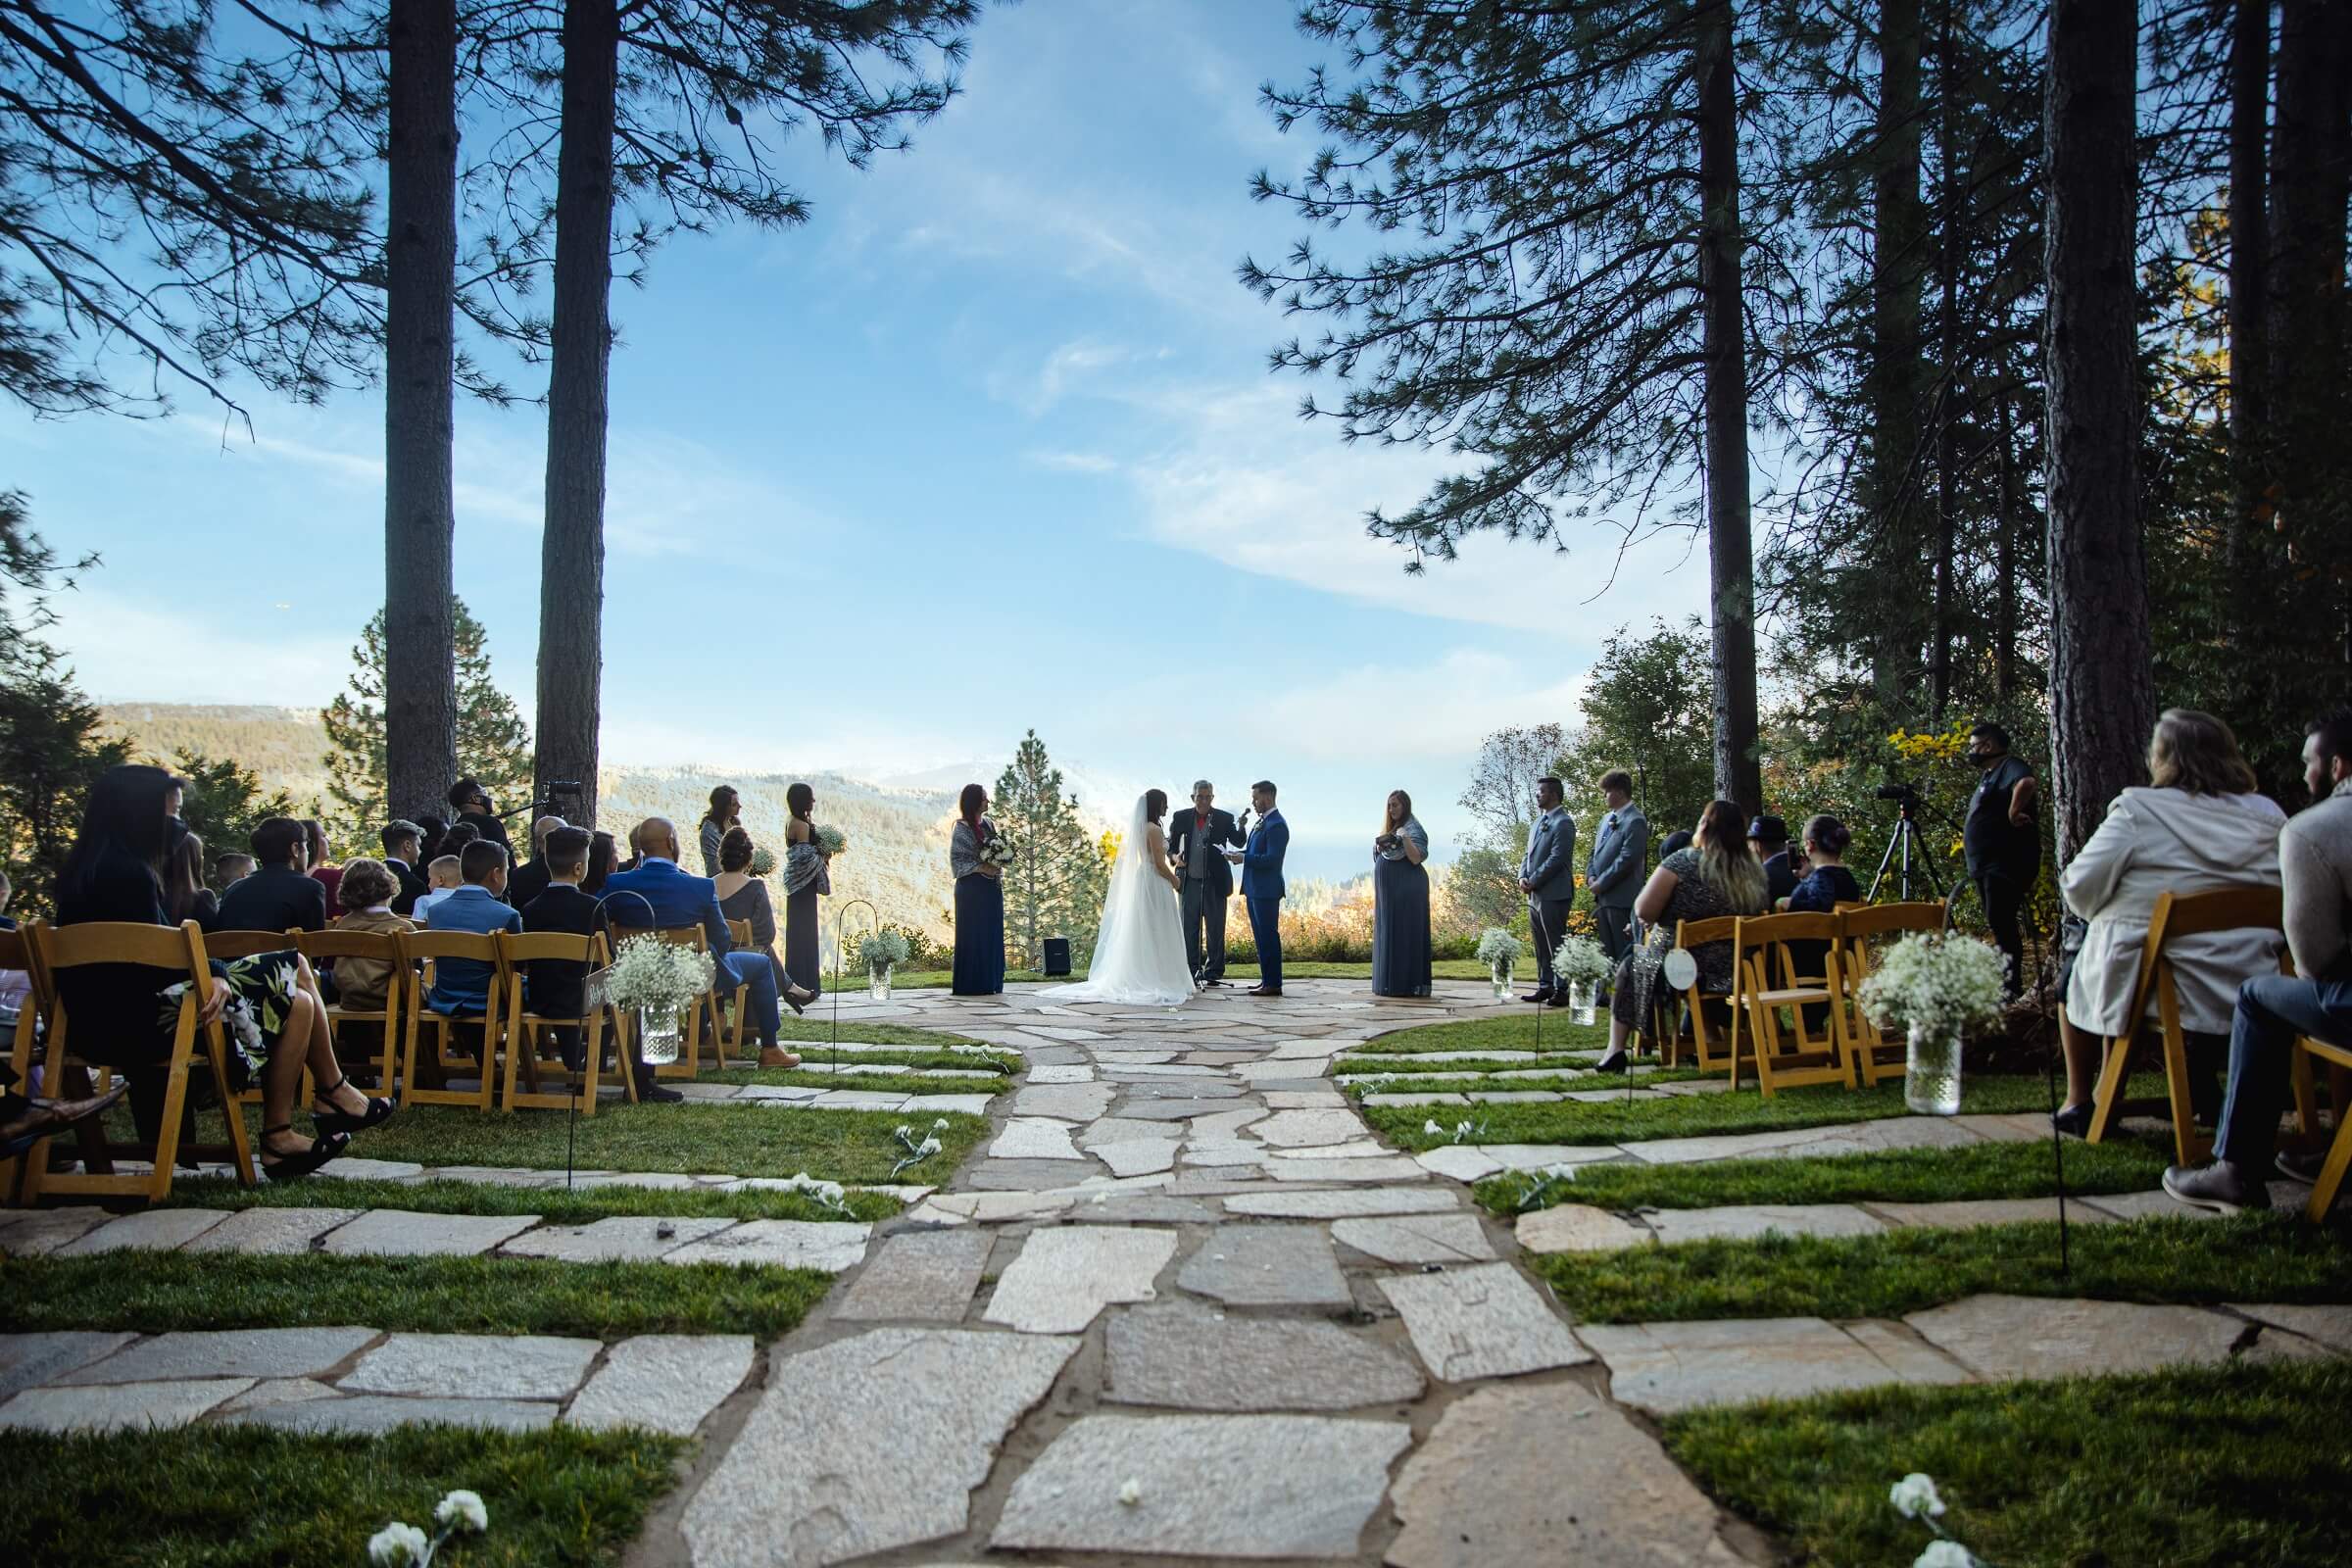 Bride and groom at the altar at their forest house lodge wedding overlooking the sierra mountains with their guests looking on. The sky is blue and the couple is facing each other.